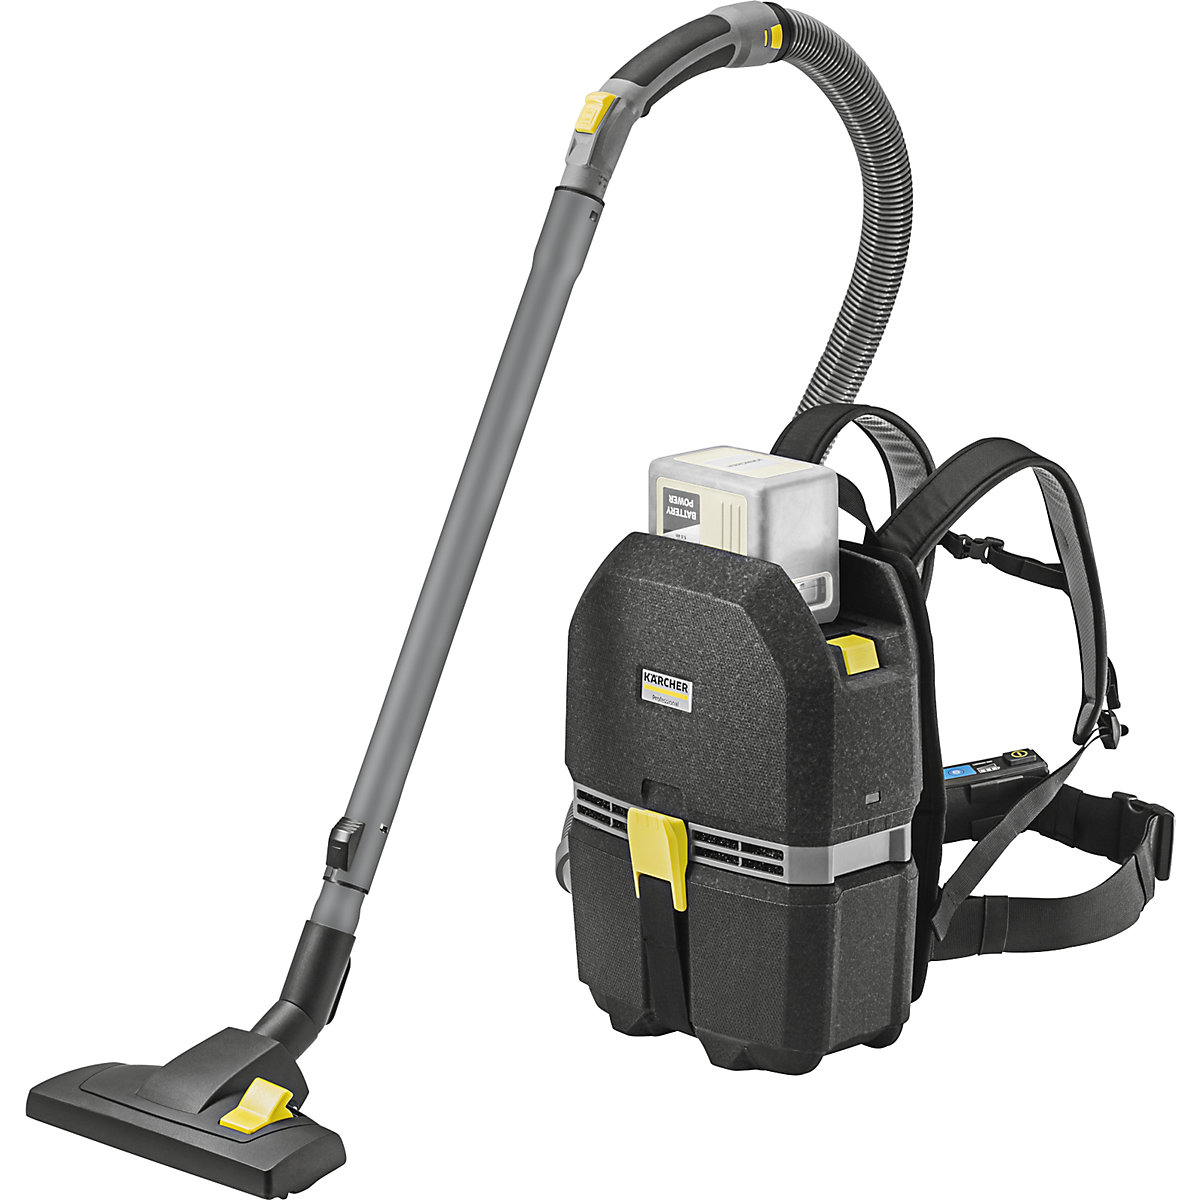 Rechargeable backpack vacuum cleaner – Kärcher